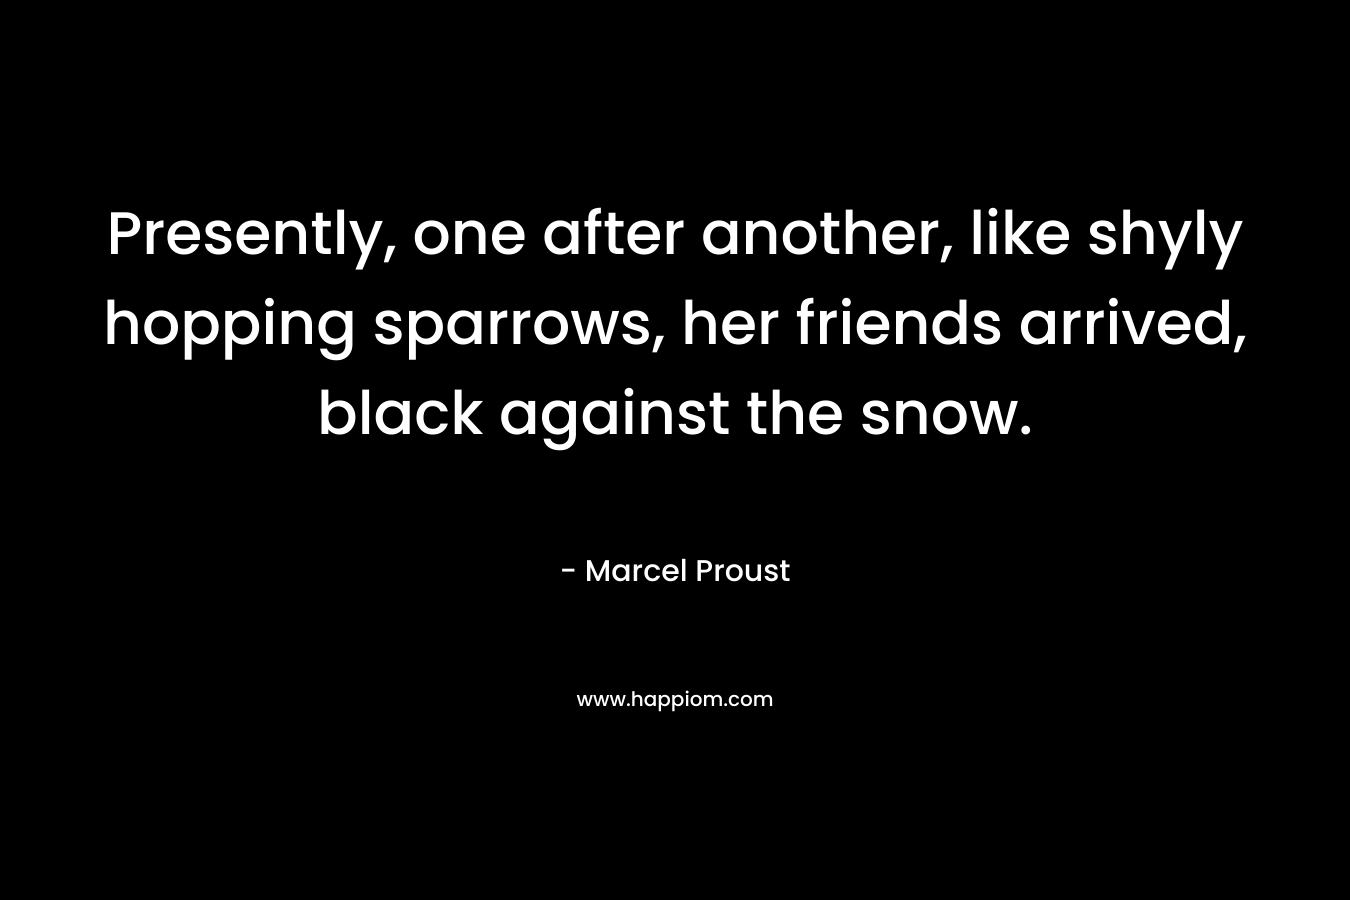 Presently, one after another, like shyly hopping sparrows, her friends arrived, black against the snow. – Marcel Proust